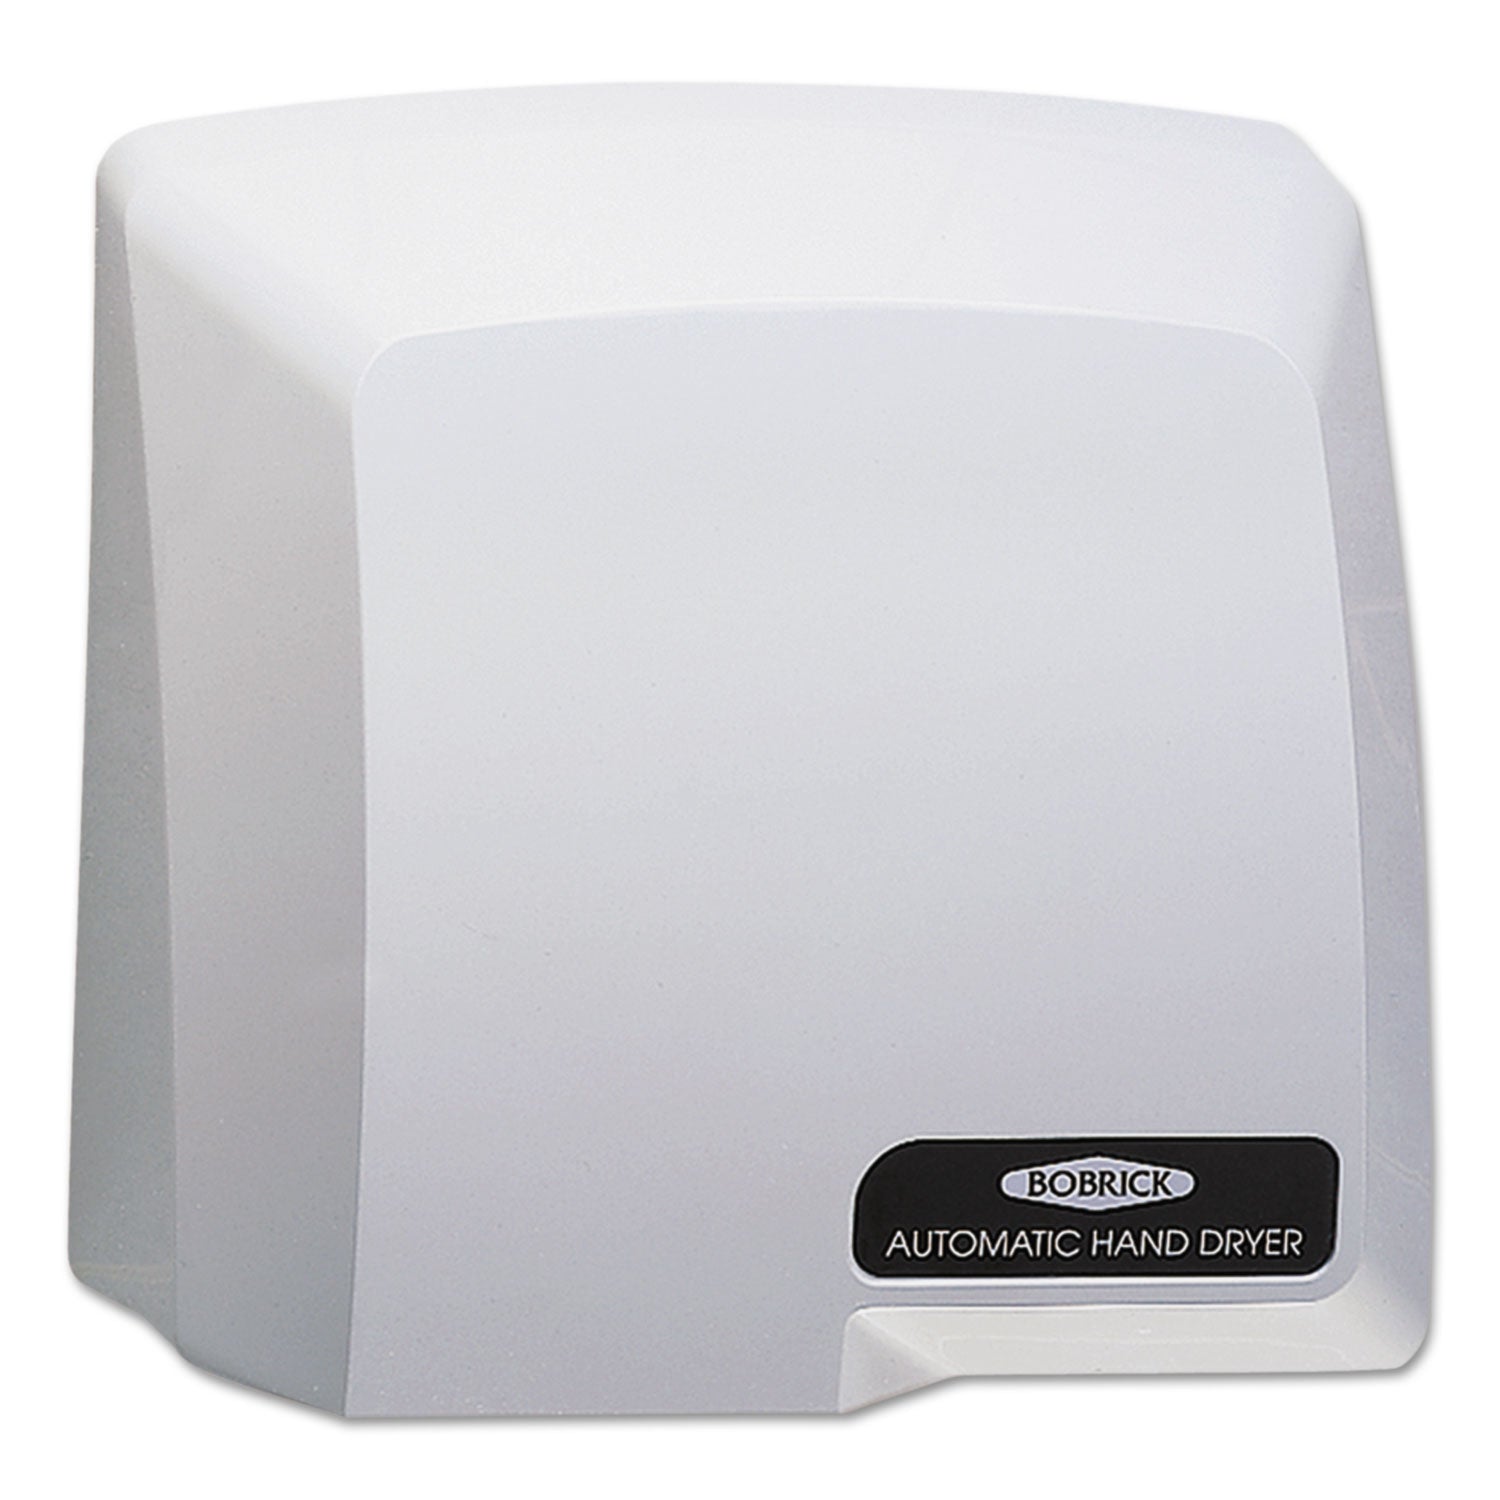 Compact Automatic Hand Dryer, 115 V, 10.18 x 5.18 x 10.93, Gray - 